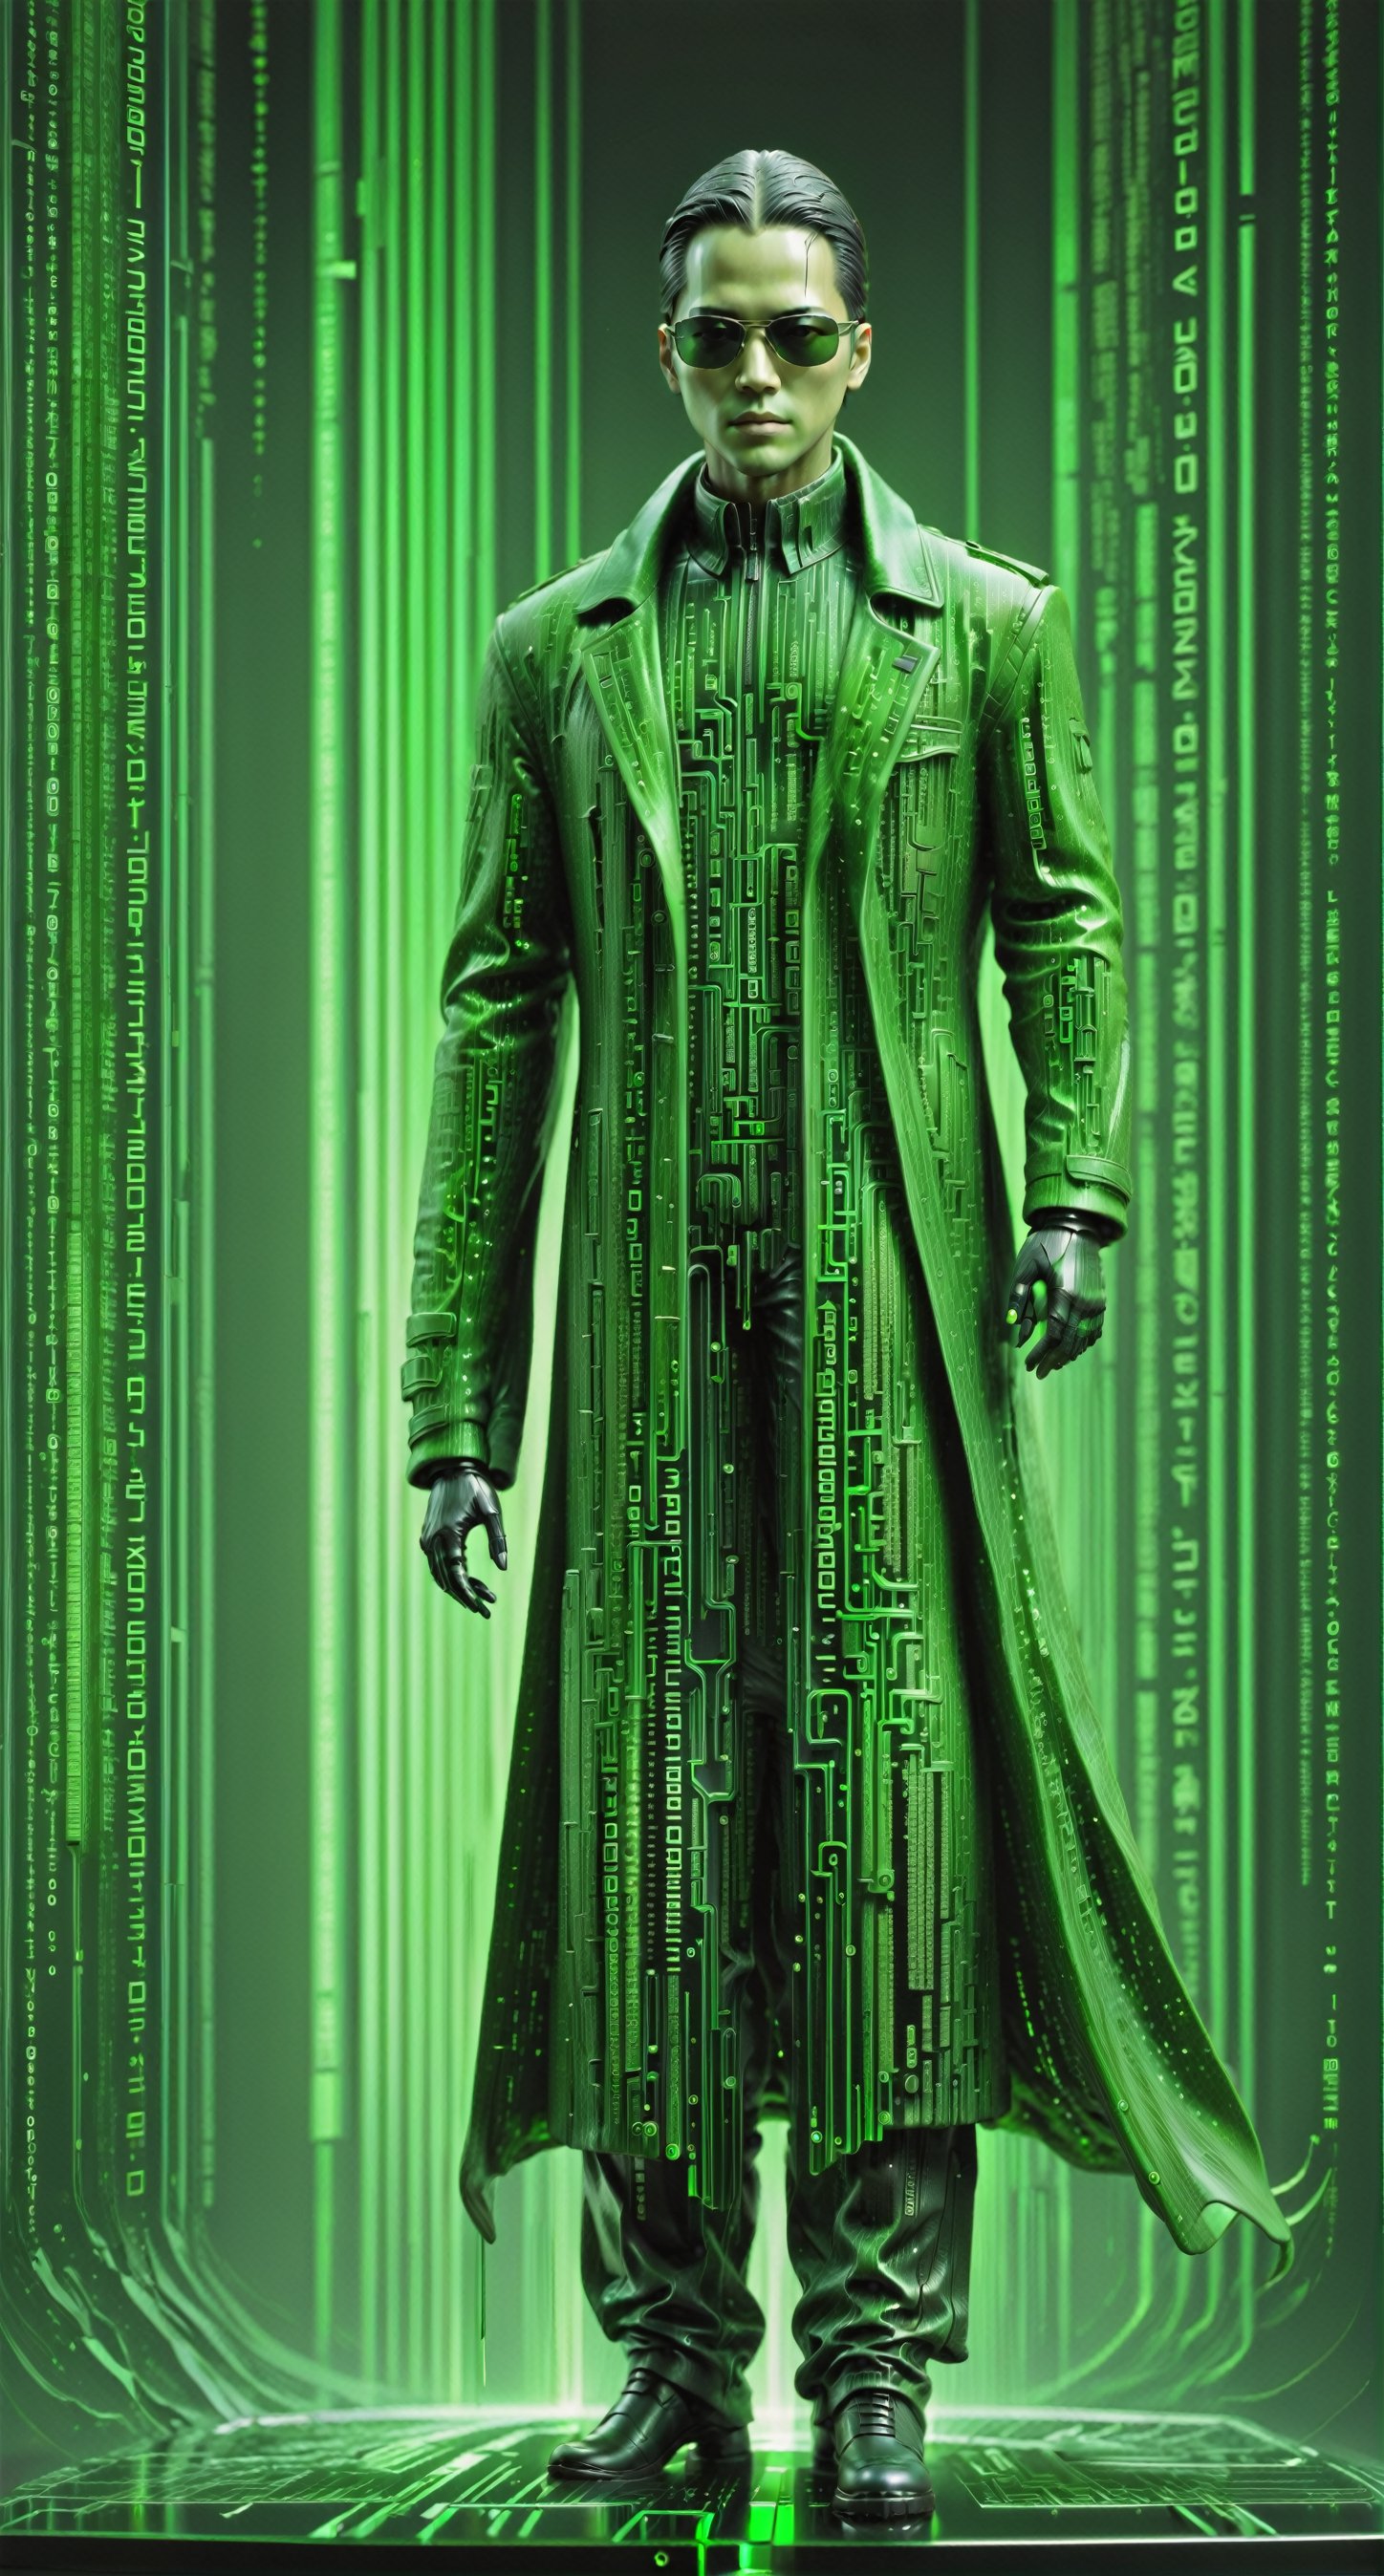 Behold a transparent glass sculpture of Neo from The Matrix, cyberpunk Sunglasses, clear glass trench coat filled with cascading green Matrix code, sculpture within cascading green digital matrix code, his ethereal form filled with cascading green Matrix code, embodying the harmony between nature and technology.

Clear Glass Skin,Obsidian Enigma Art Style

#DigitalSymphony
#CodeMystique
#BinaryDreams
#MatrixElegance
#NeonCipher
#VirtualRealityCanvas
#GlitchArtSaga
#DataAlchemy
#QuantumVisions
#CyberneticAura